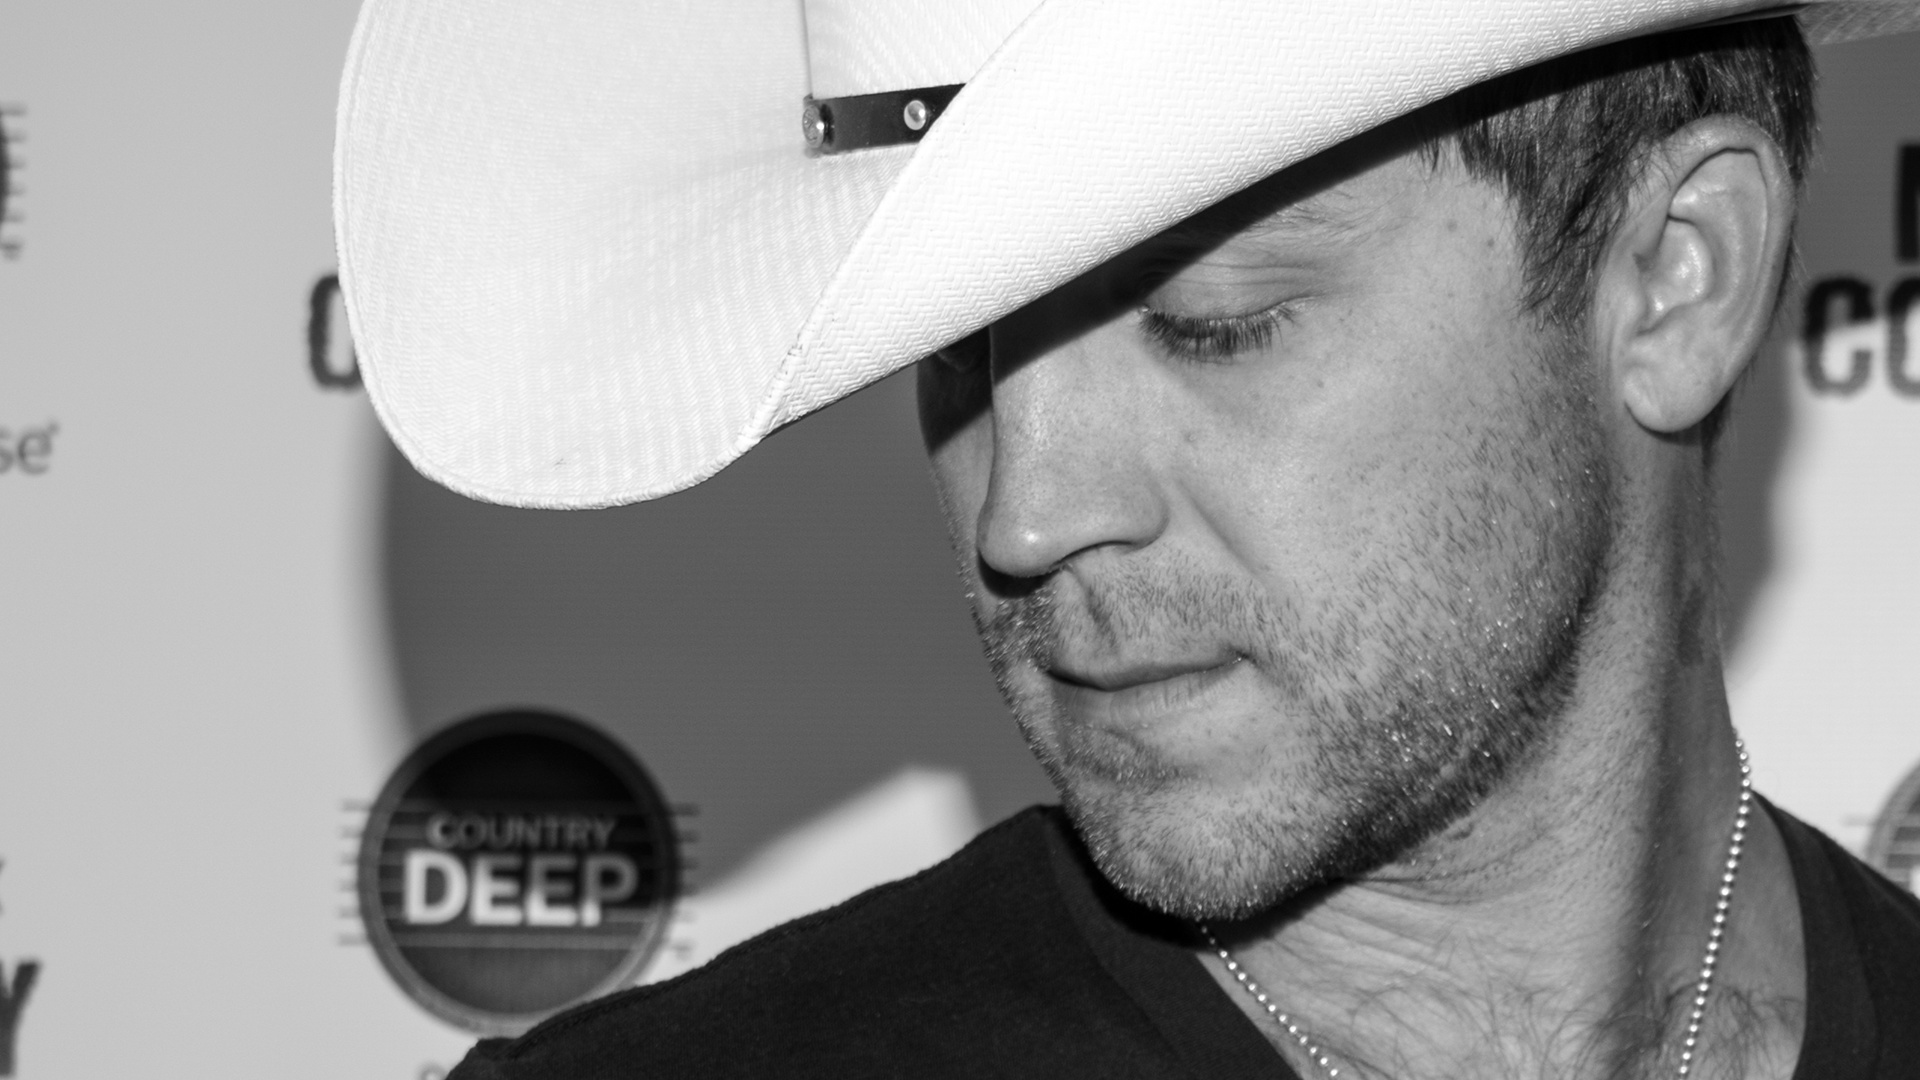 Justin Moore wallpapers, Music, HQ Justin Moore pictures | 4K Wallpapers 2019 1920x1080